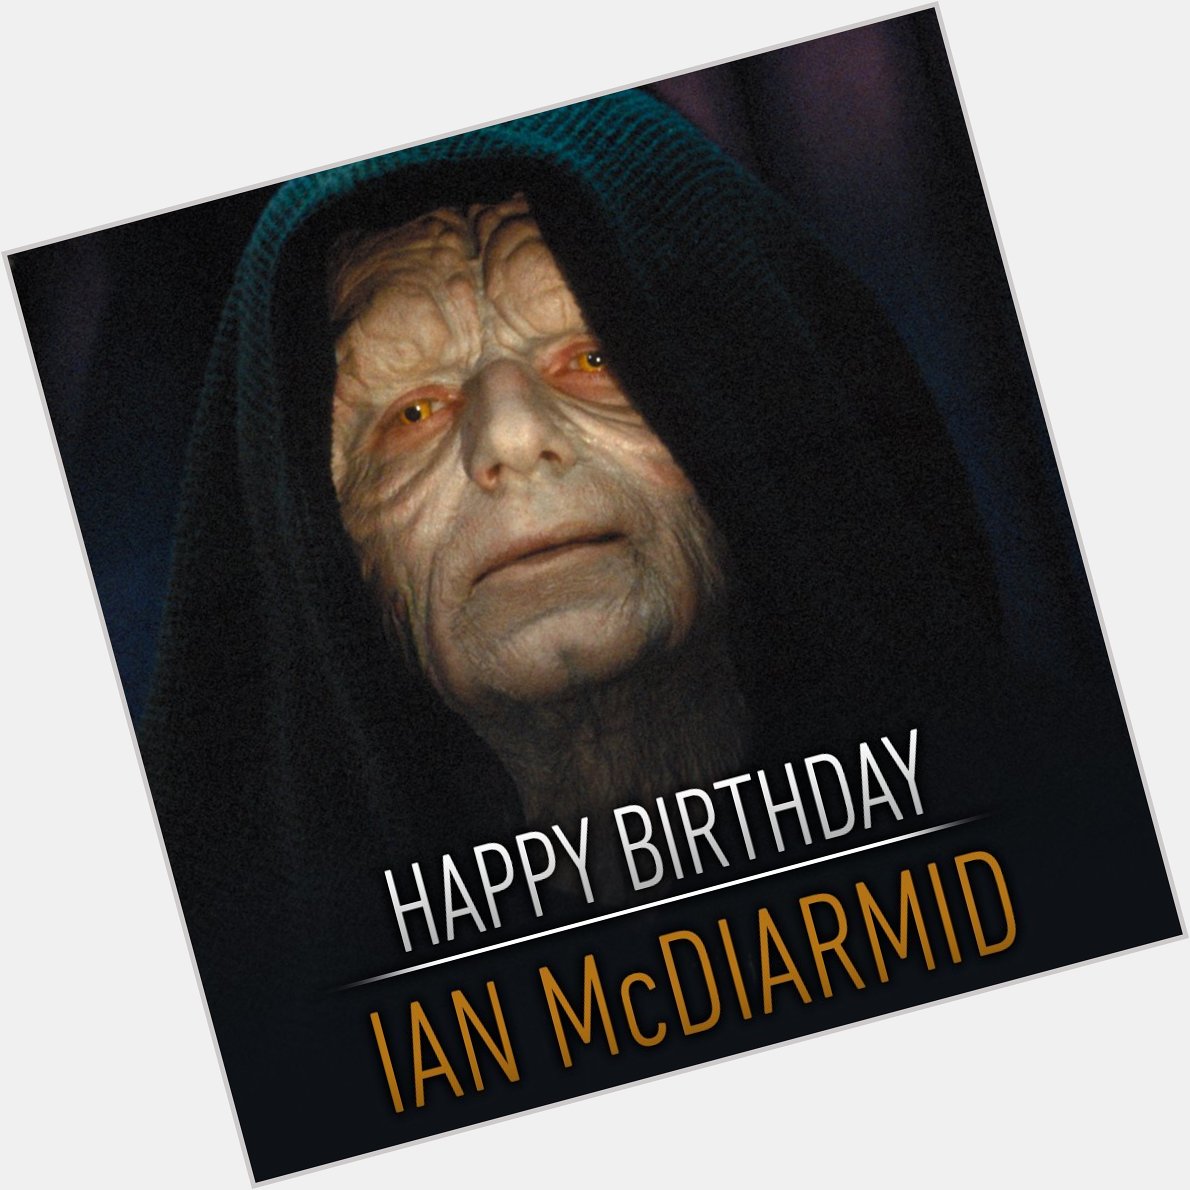 Happy birthday to the man who brought the Emperor to life, Ian McDiarmid 